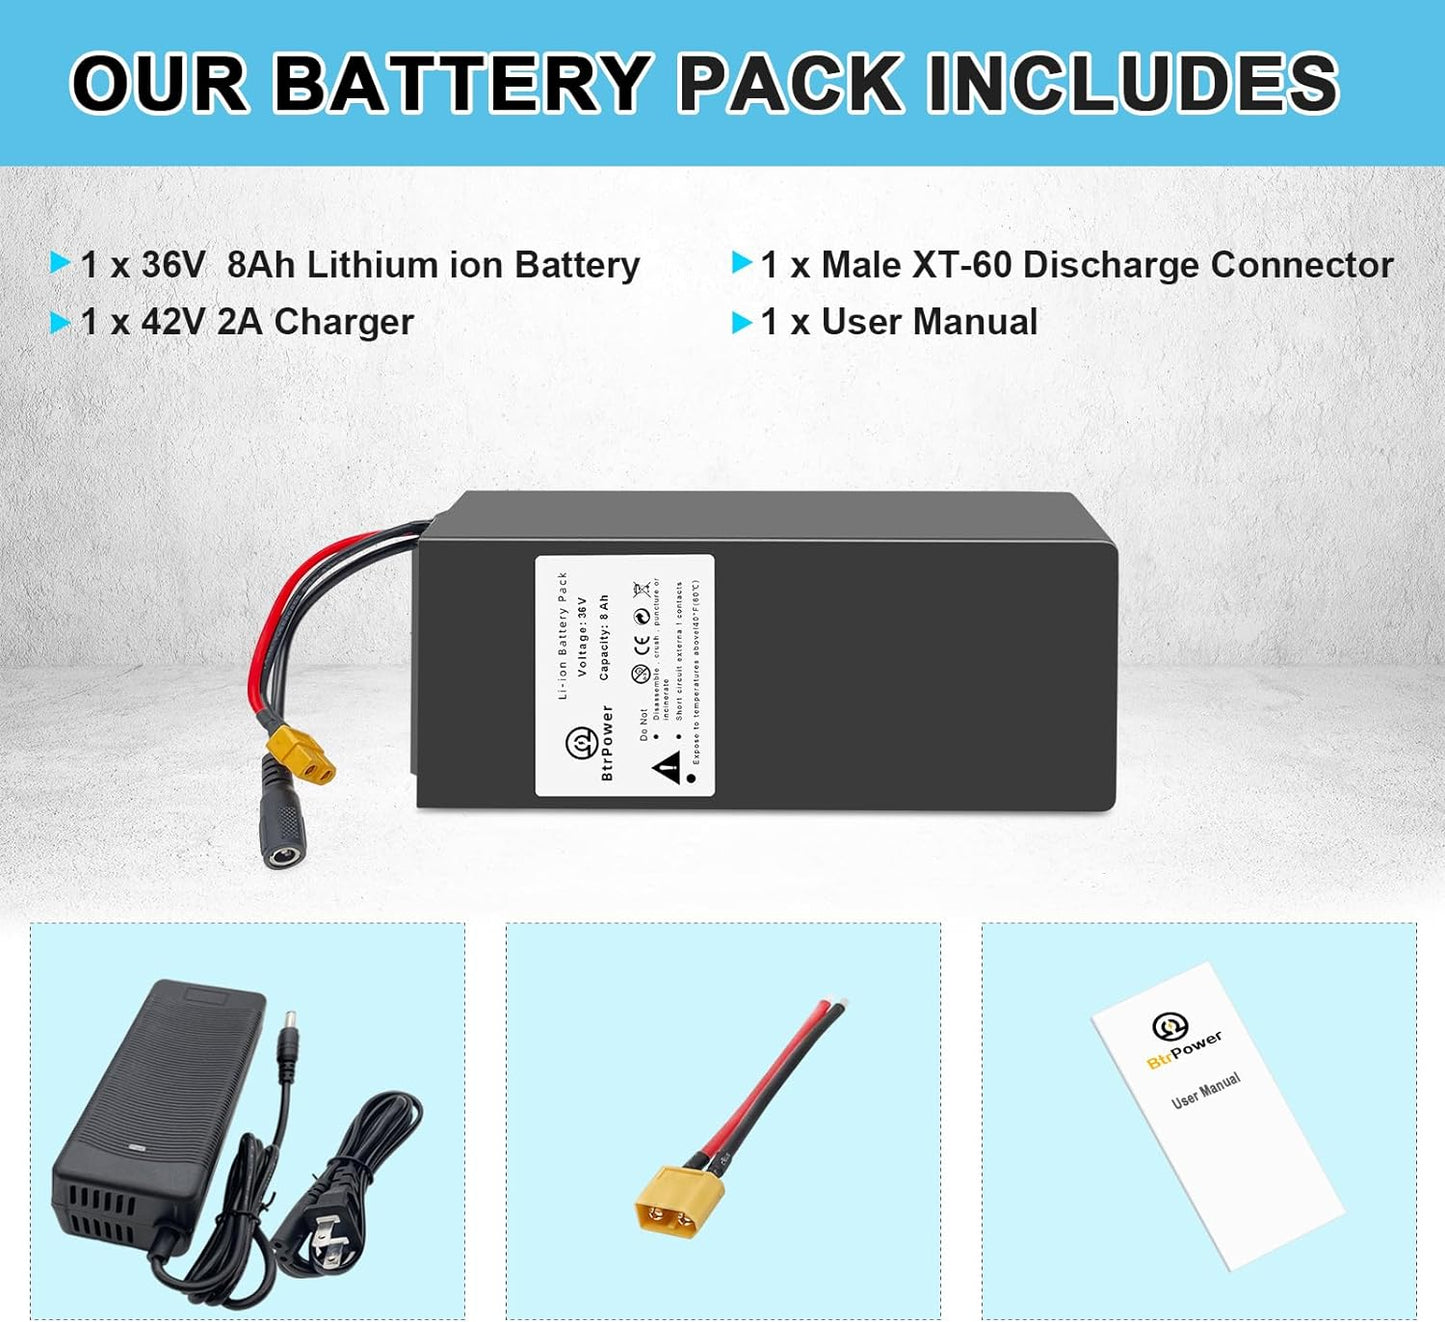 BtrPower Ebike Battery 36V 8AH, Li- ion Battery Pack with 2A Charger and 20A BMS